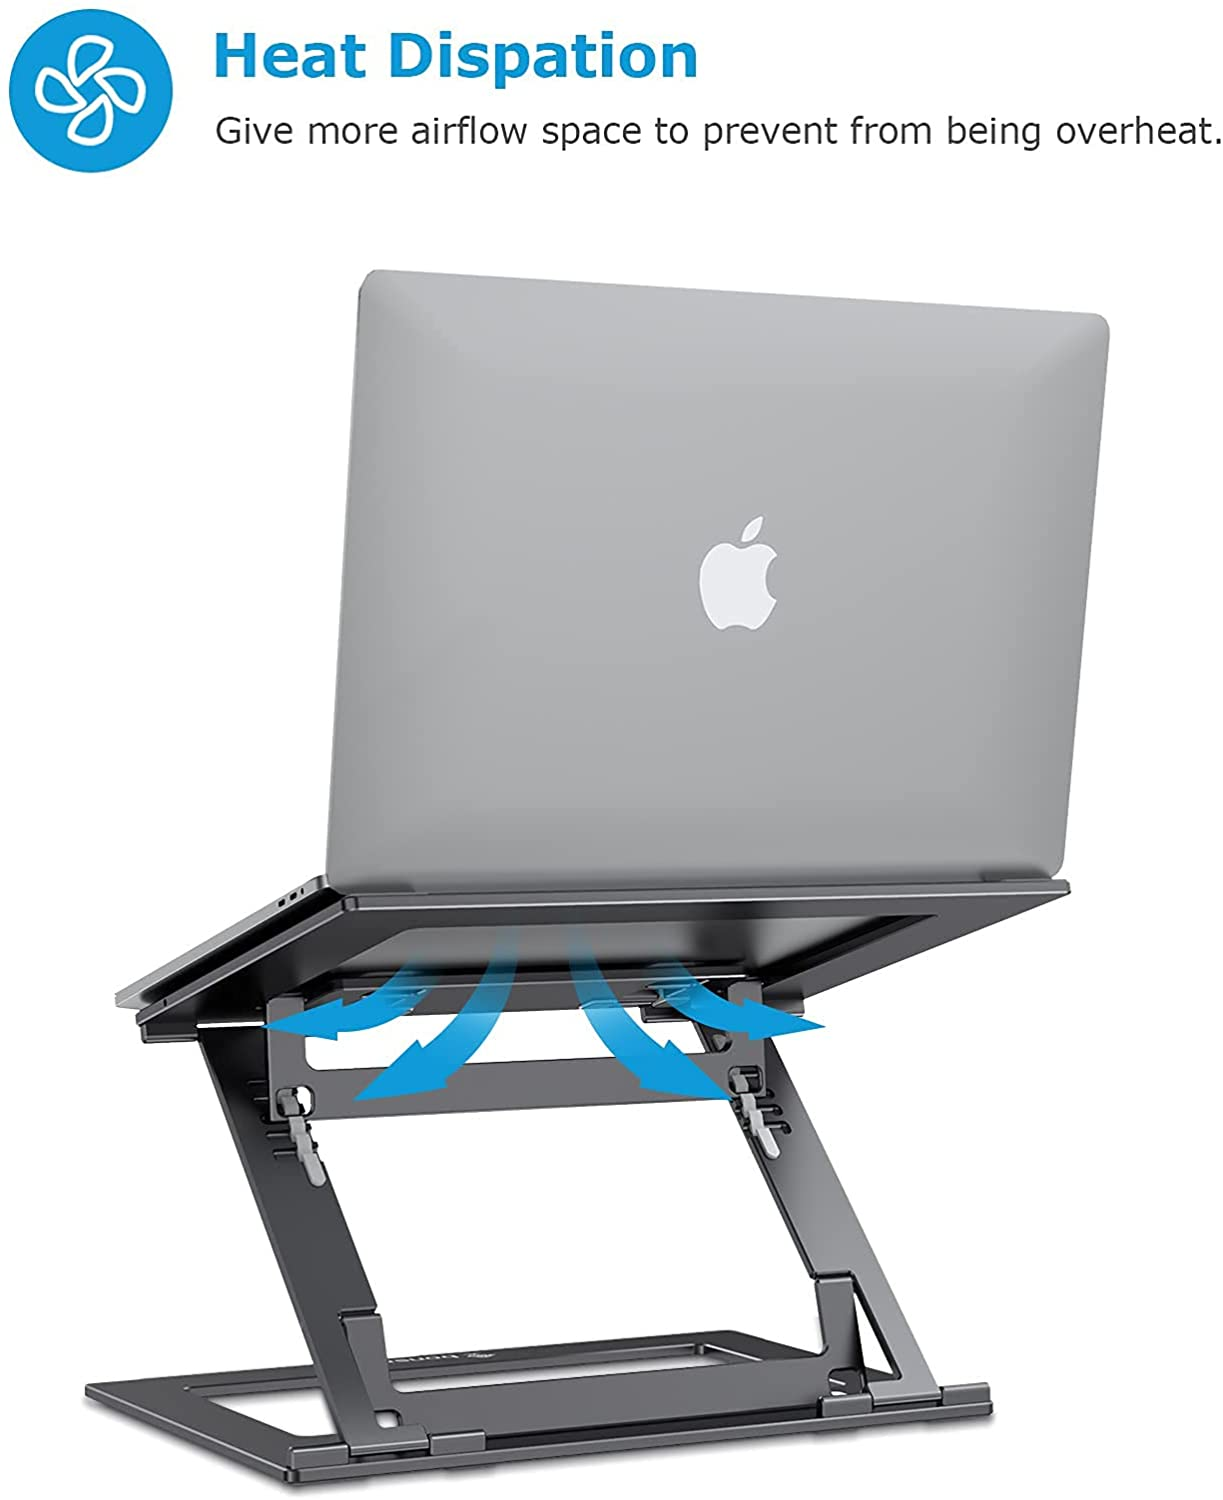 Laptop Stand for Desk, Ergonomic Adjustable Computer Stand for Laptop, Portable Laptop Stand with 15 Angles to Adjust, Support to 44Lbs and Compatible with 10-17Inch Laptop, More Other Accesssories